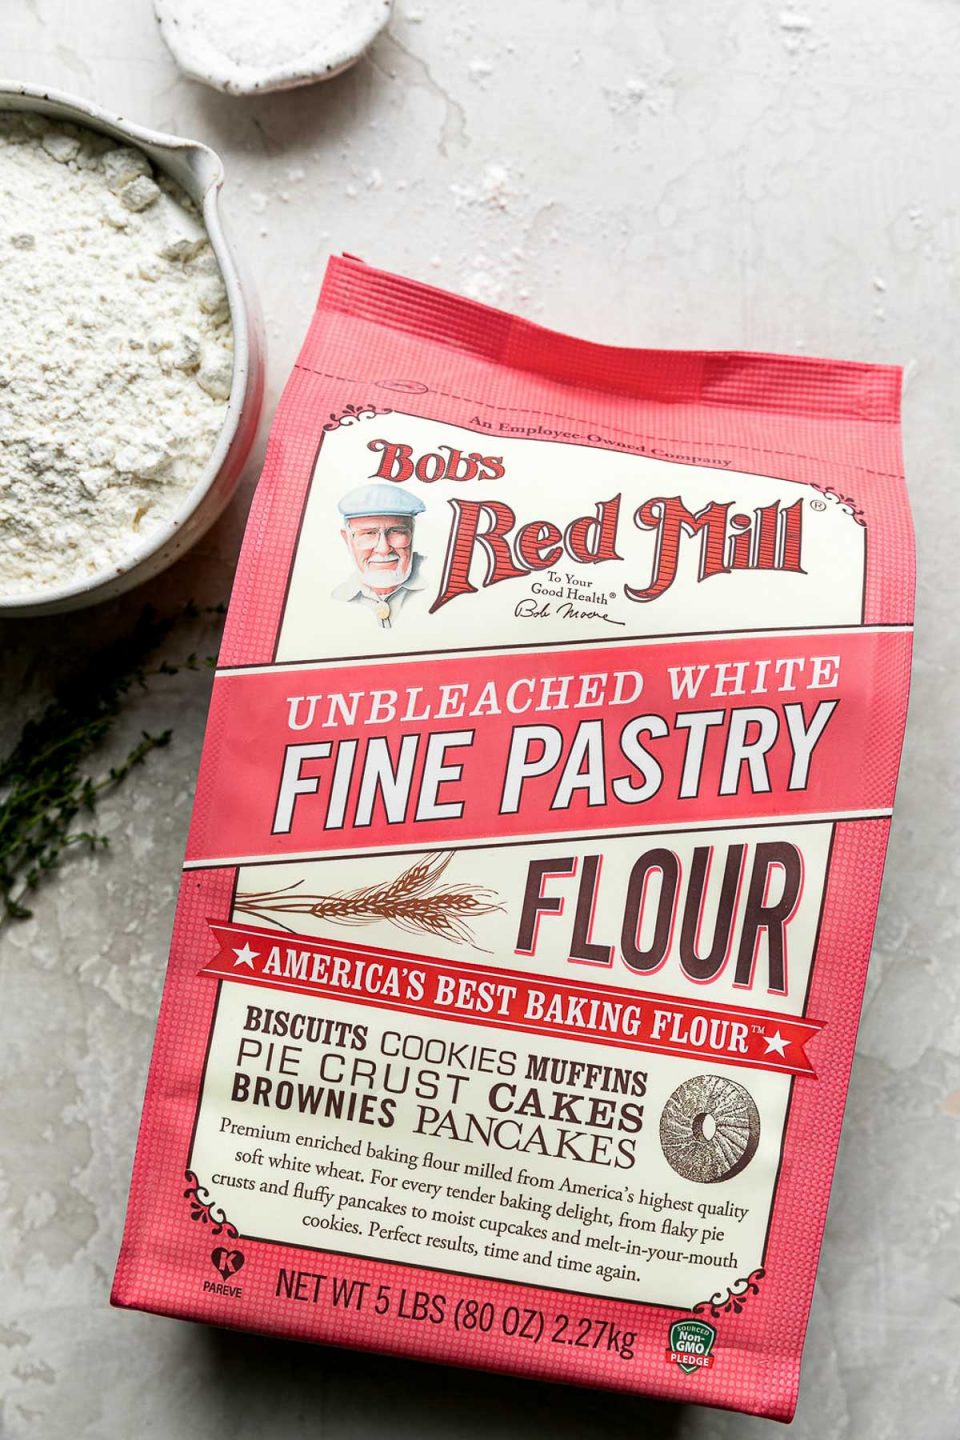 An unopened package of Bob's Red Mill Unbleached White Fine Pastry Flour rests facing upwards on a creamy white plaster textured surface. A small ceramic bowl filled with the pastry flour and a small pinch bowl filled with kosher salt rest alongside of it.